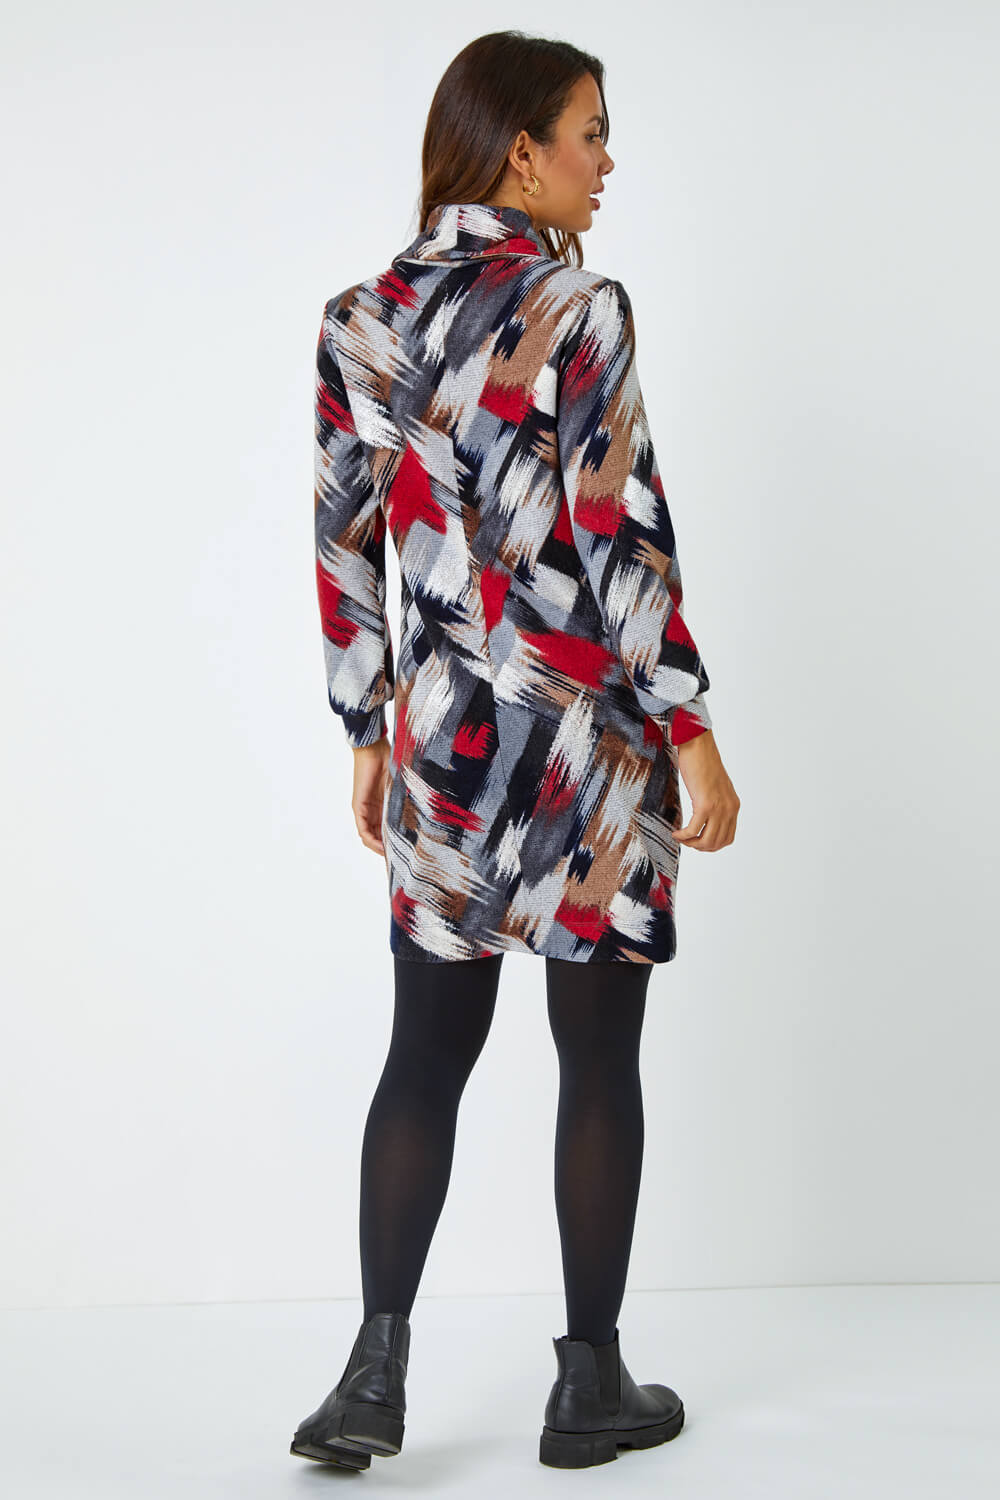 Red Cowl Neck Abstract Print Stretch Dress, Image 3 of 5